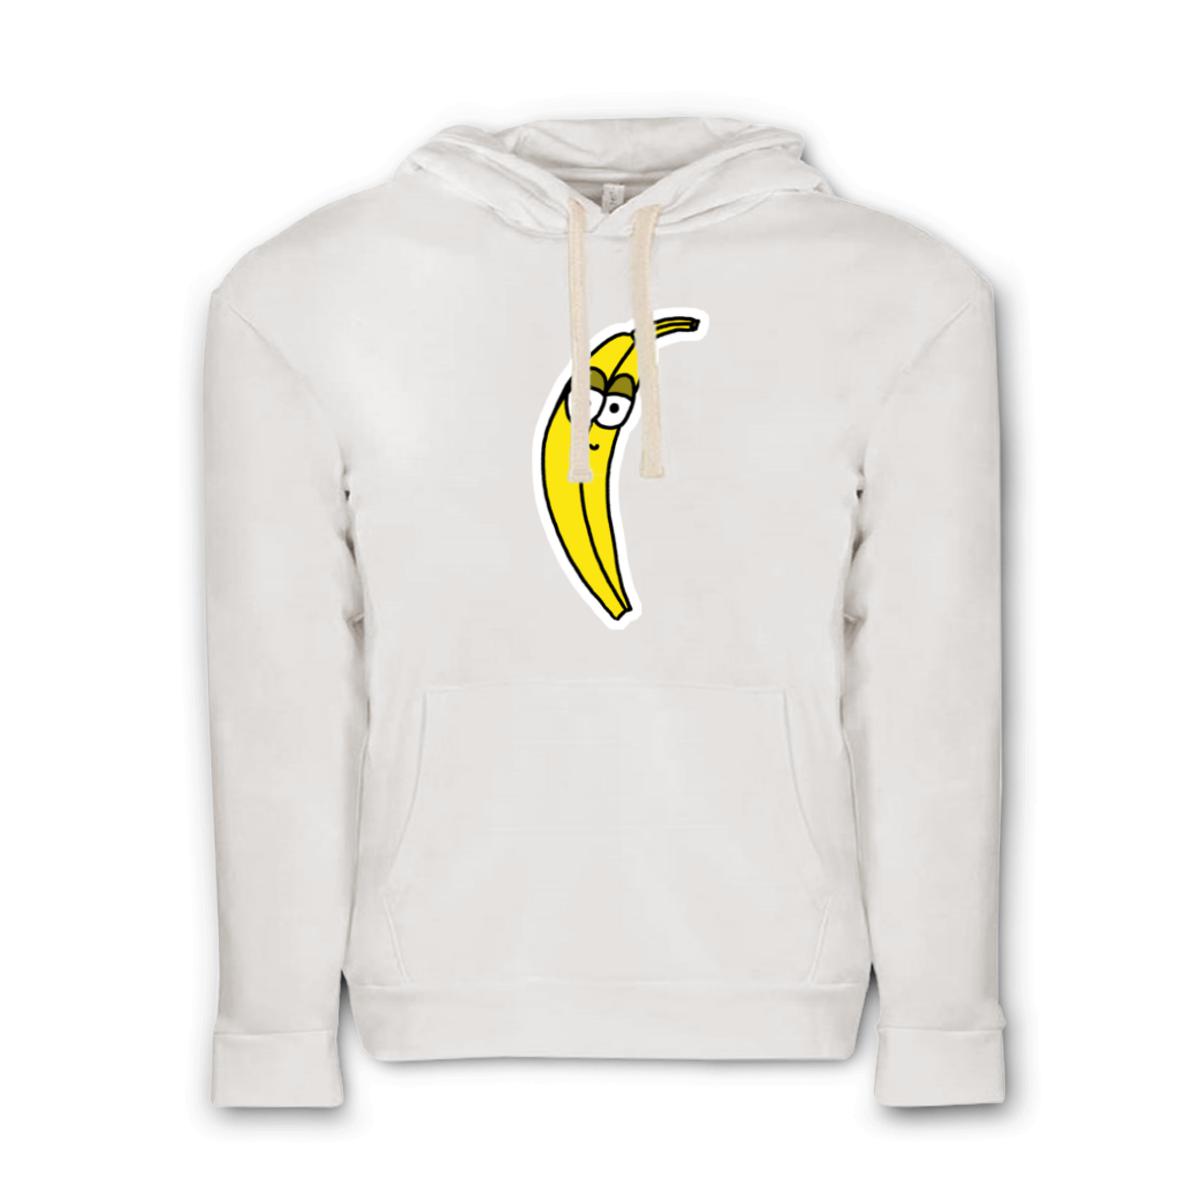 Plantain Unisex Pullover Hoodie Large white